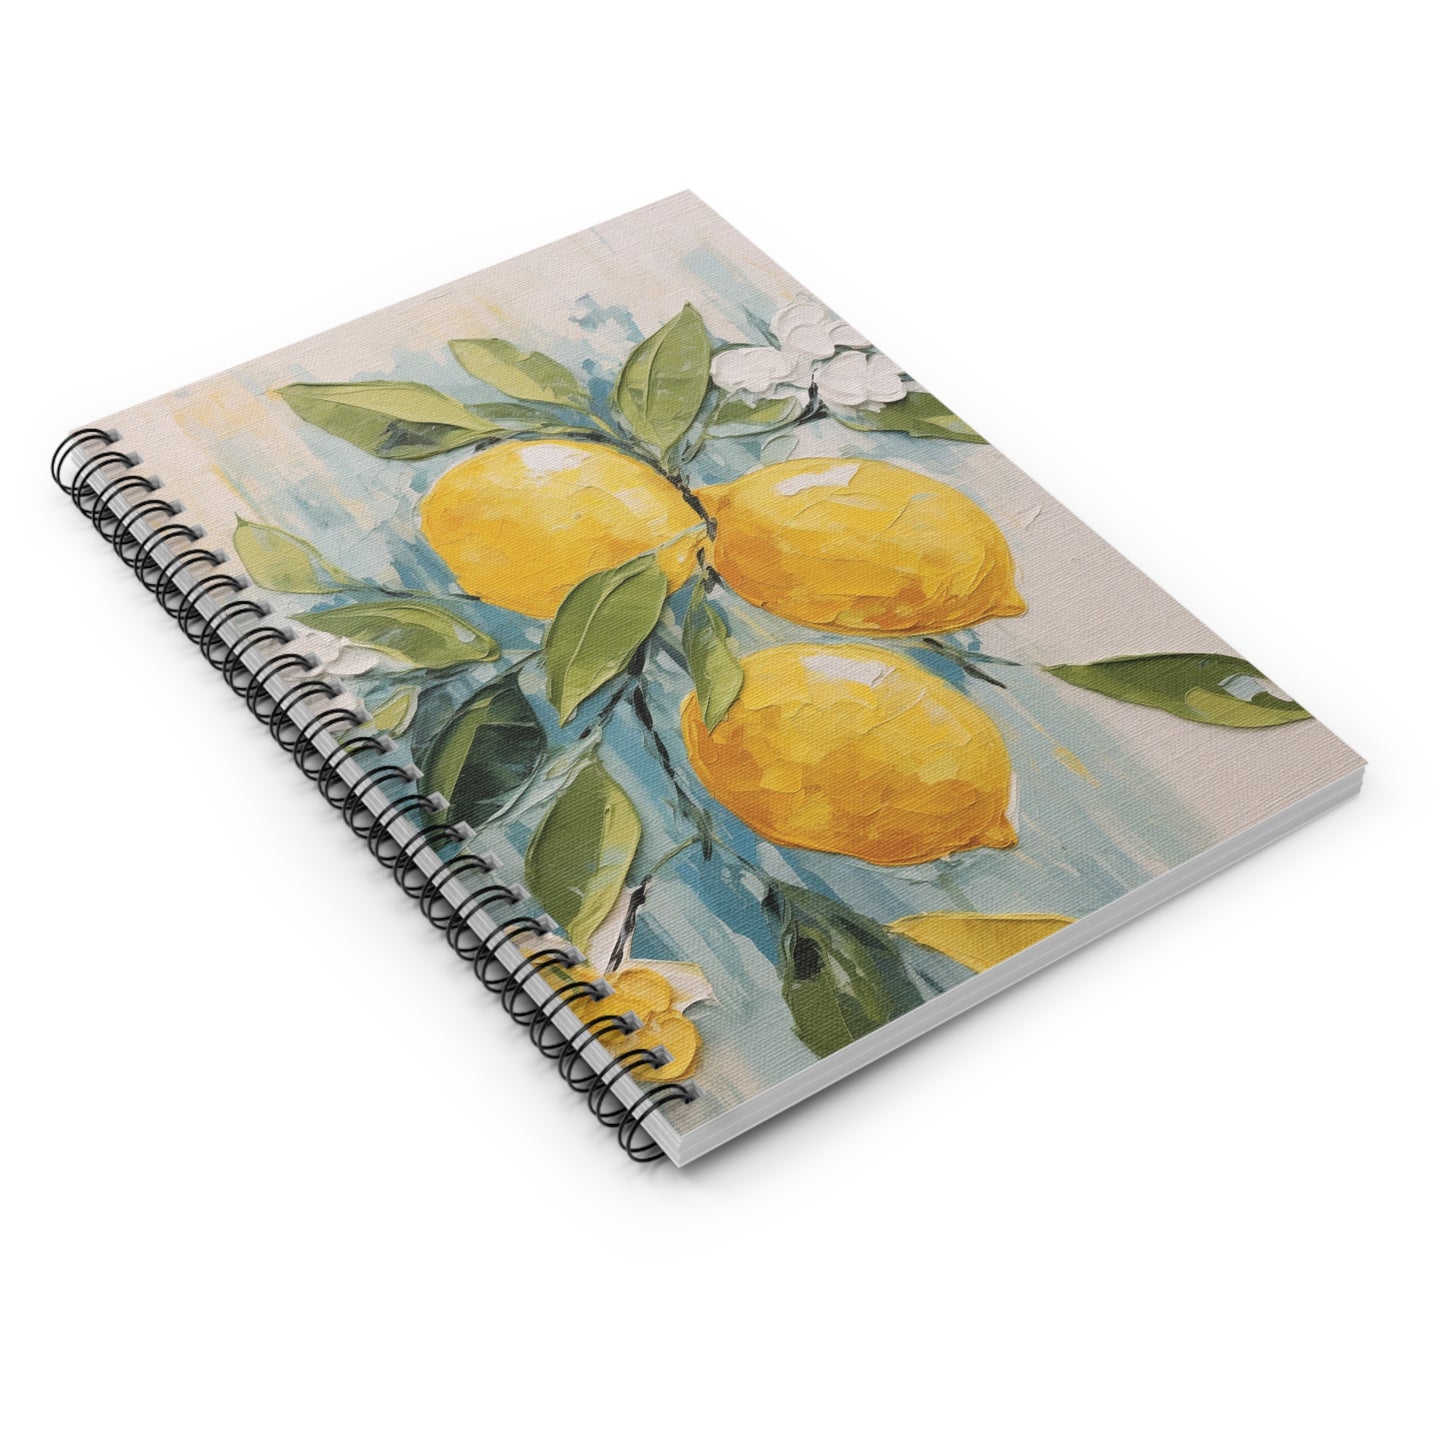 Lemon Art Print Notebook (2) - Composition Notebook, Spiral Notebook, Journal for Writing and Note-Taking